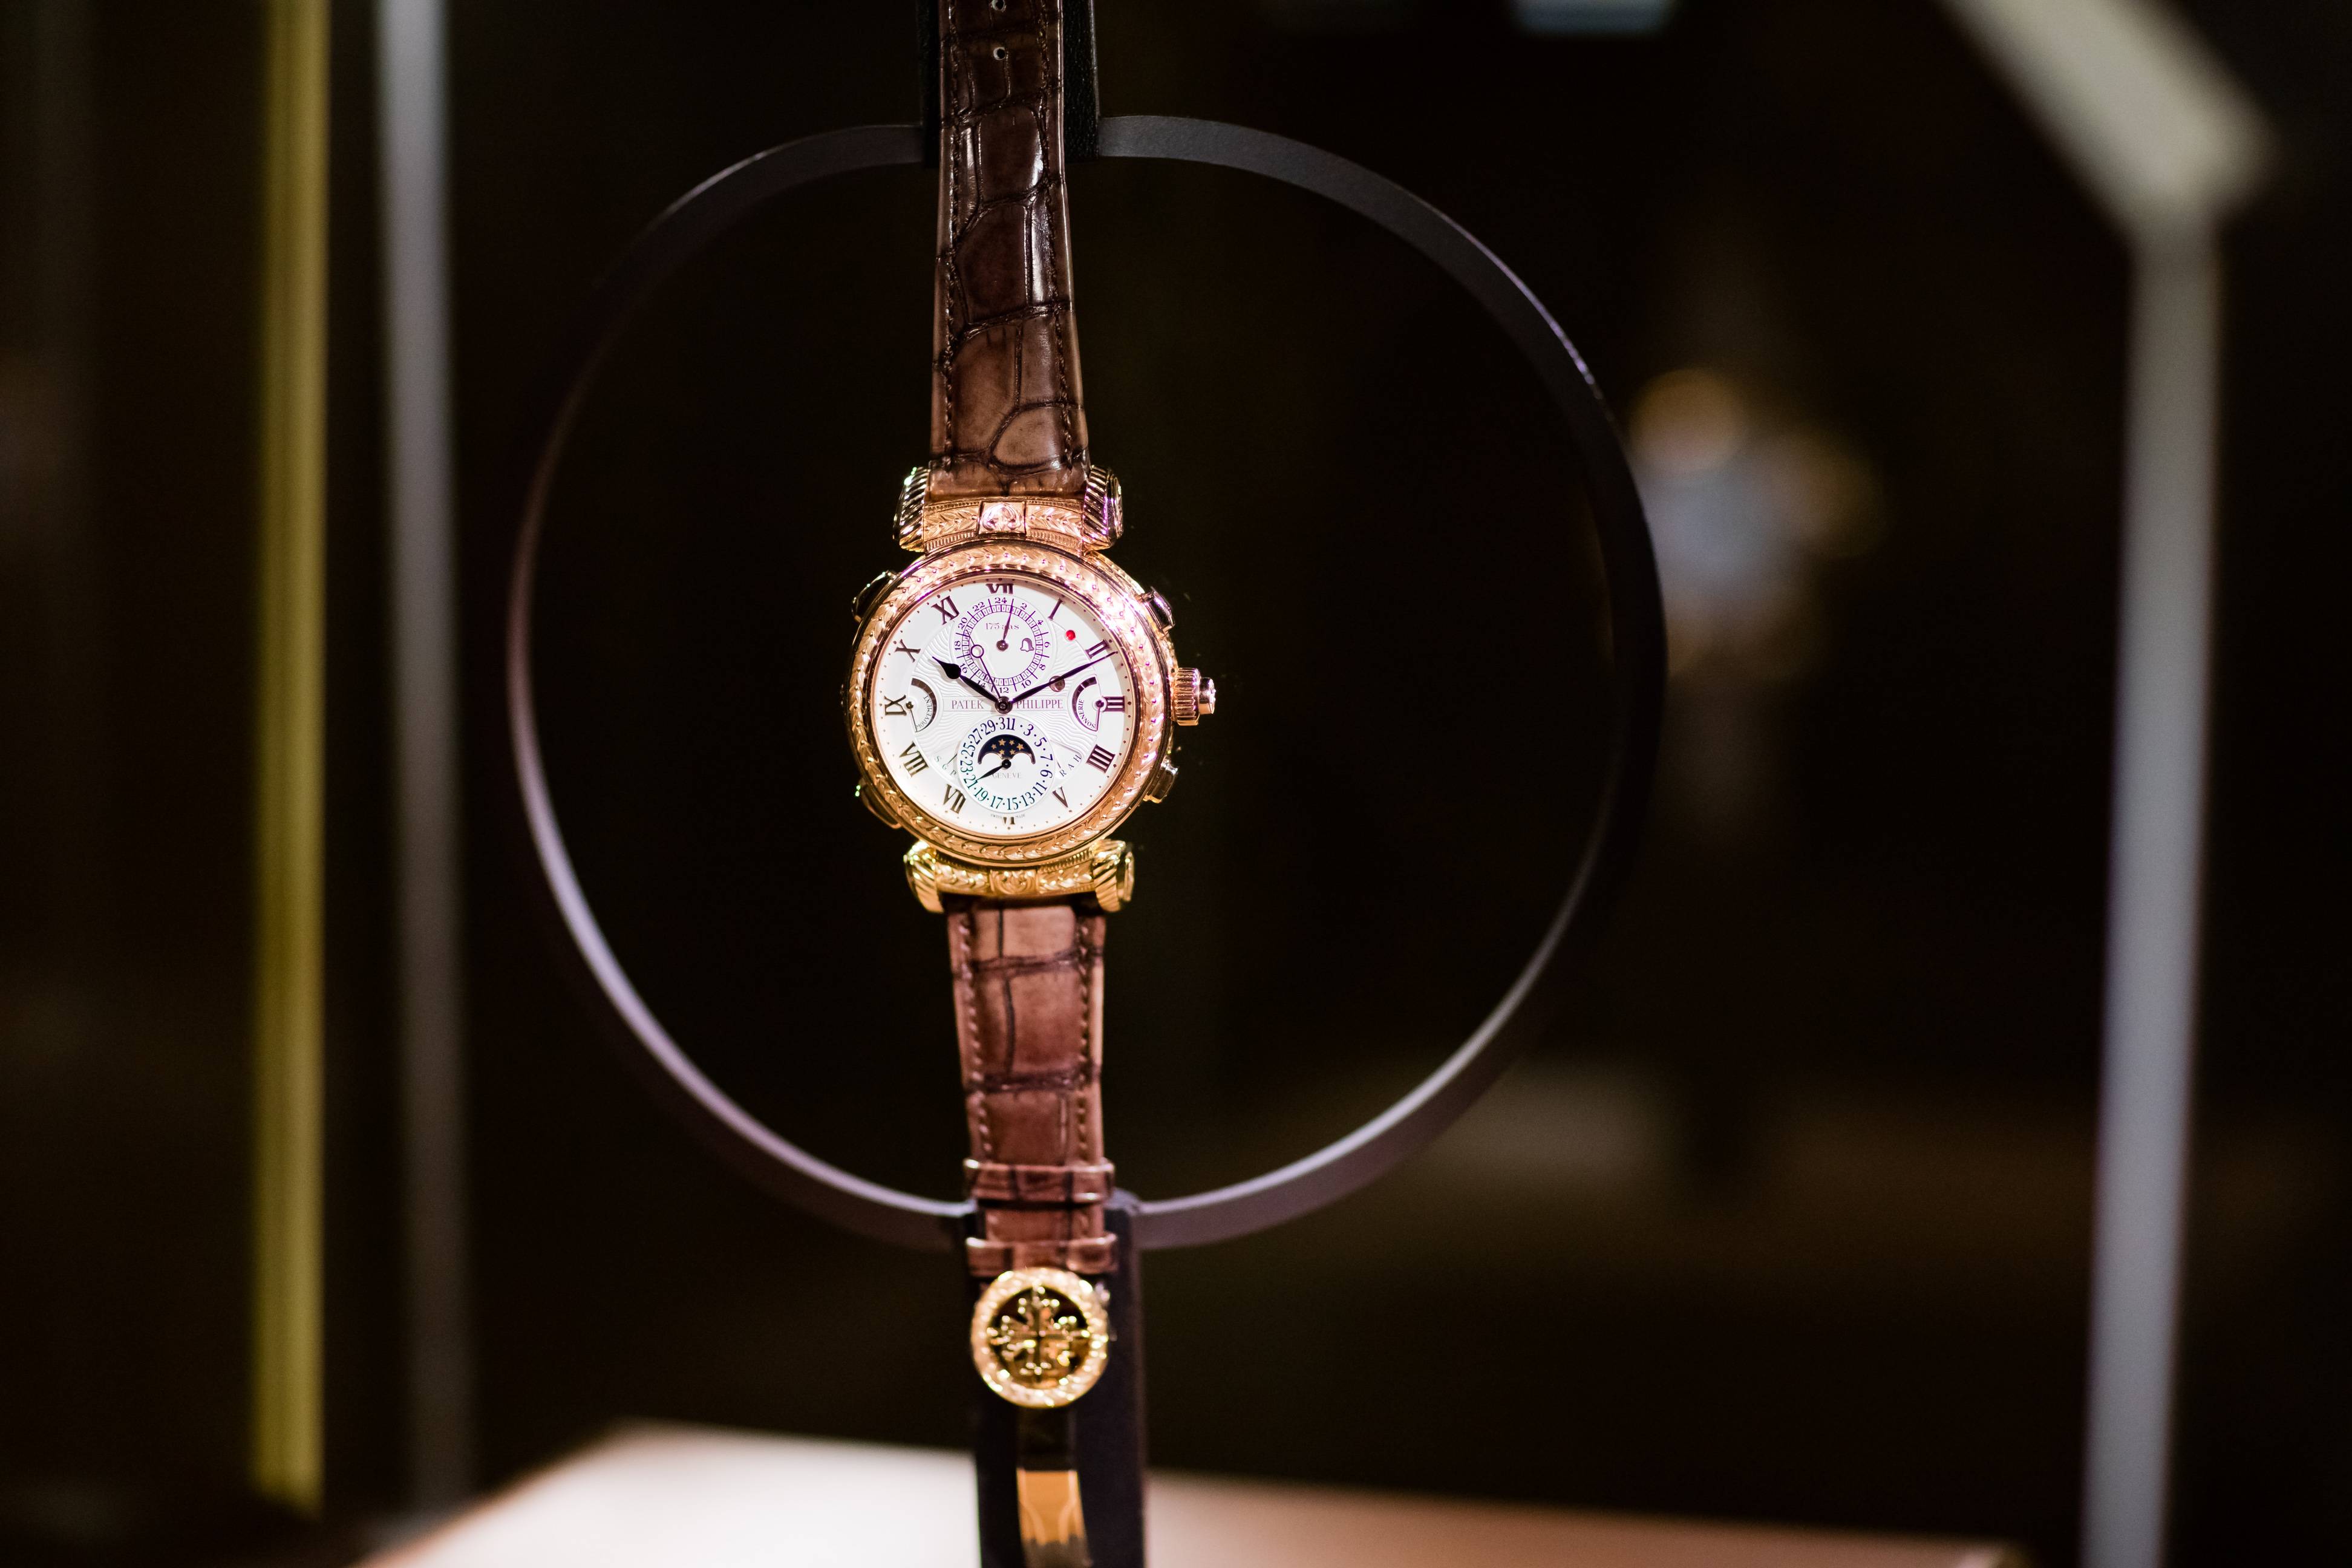 What To Expect When Visiting Patek Philippe’s Grand Exhibition?